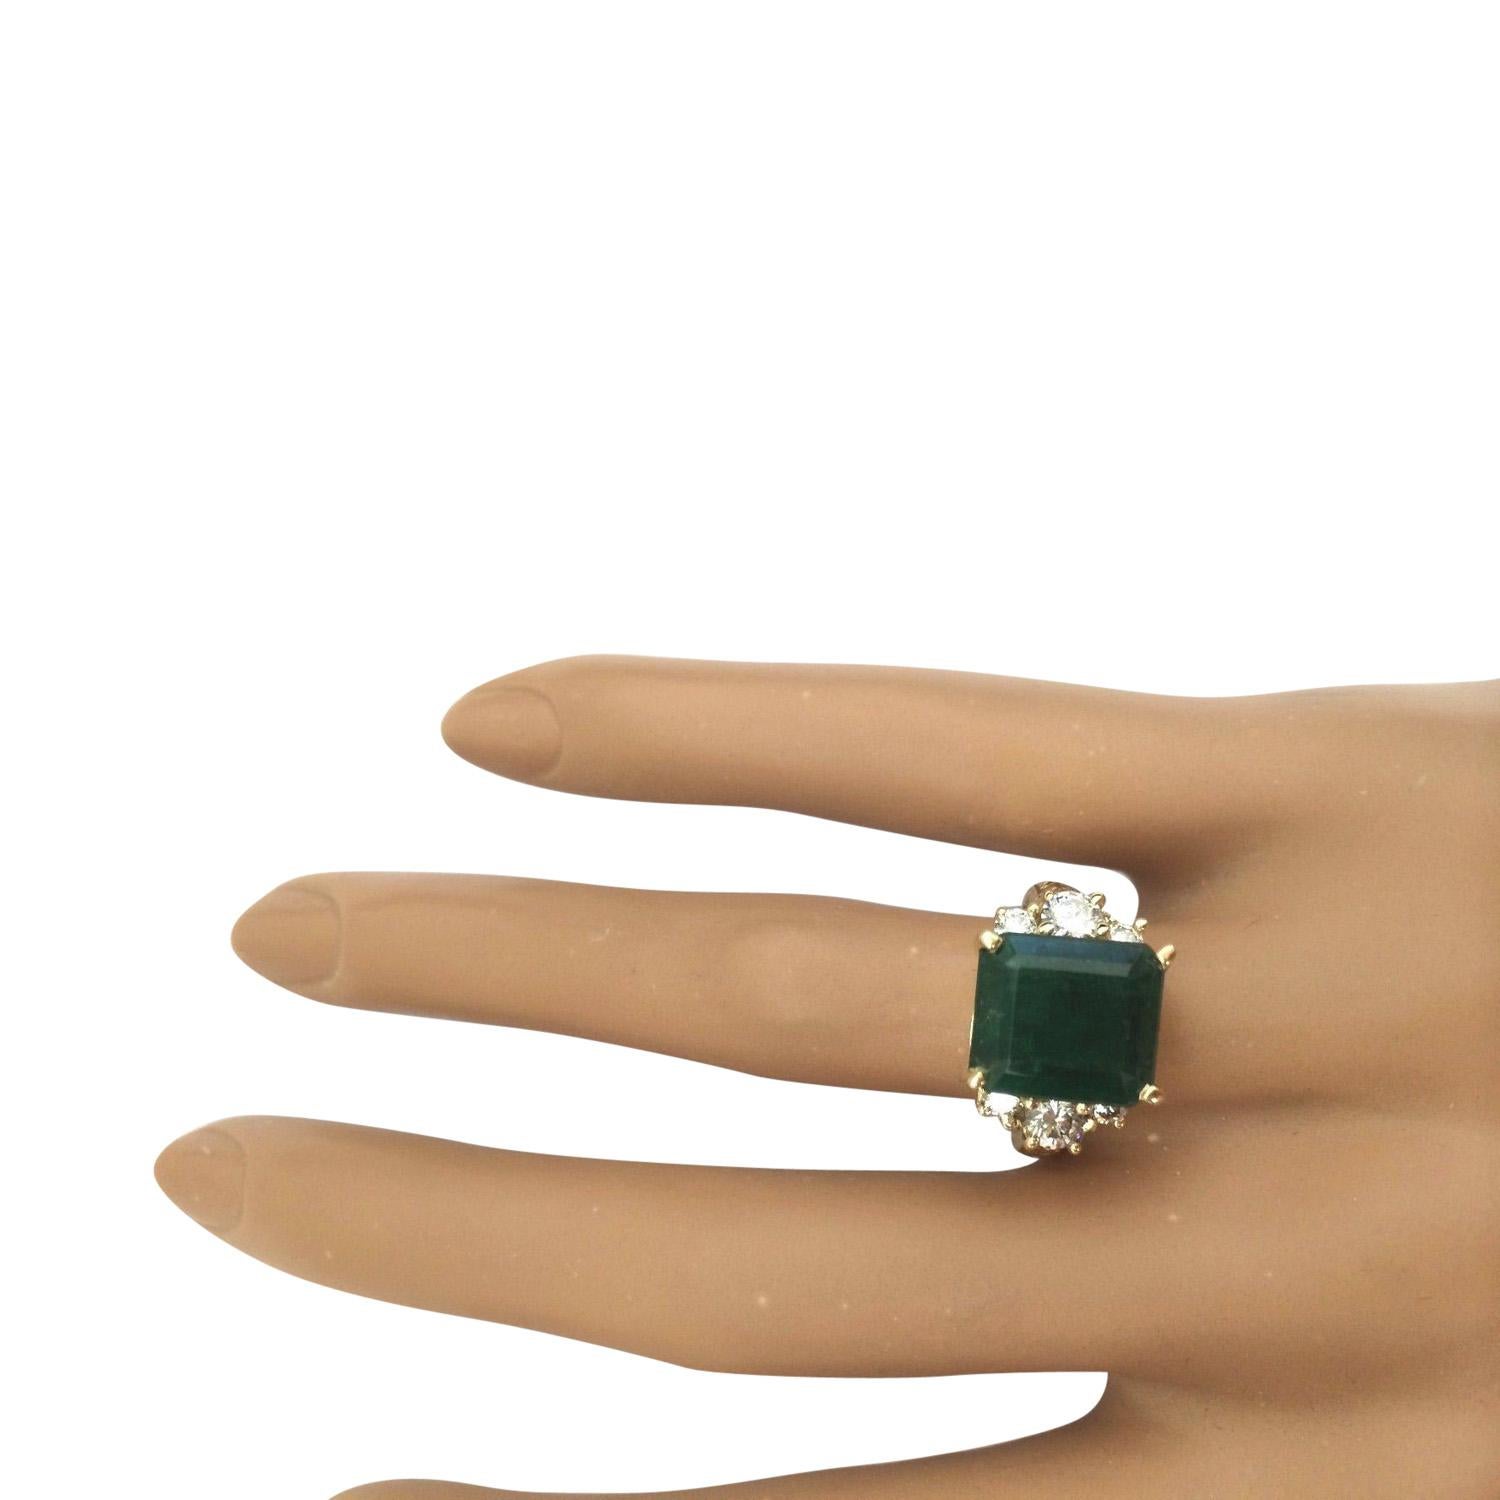 Emerald Cut Natural Emerald Diamond Ring In 14 Karat Solid Yellow Gold  For Sale